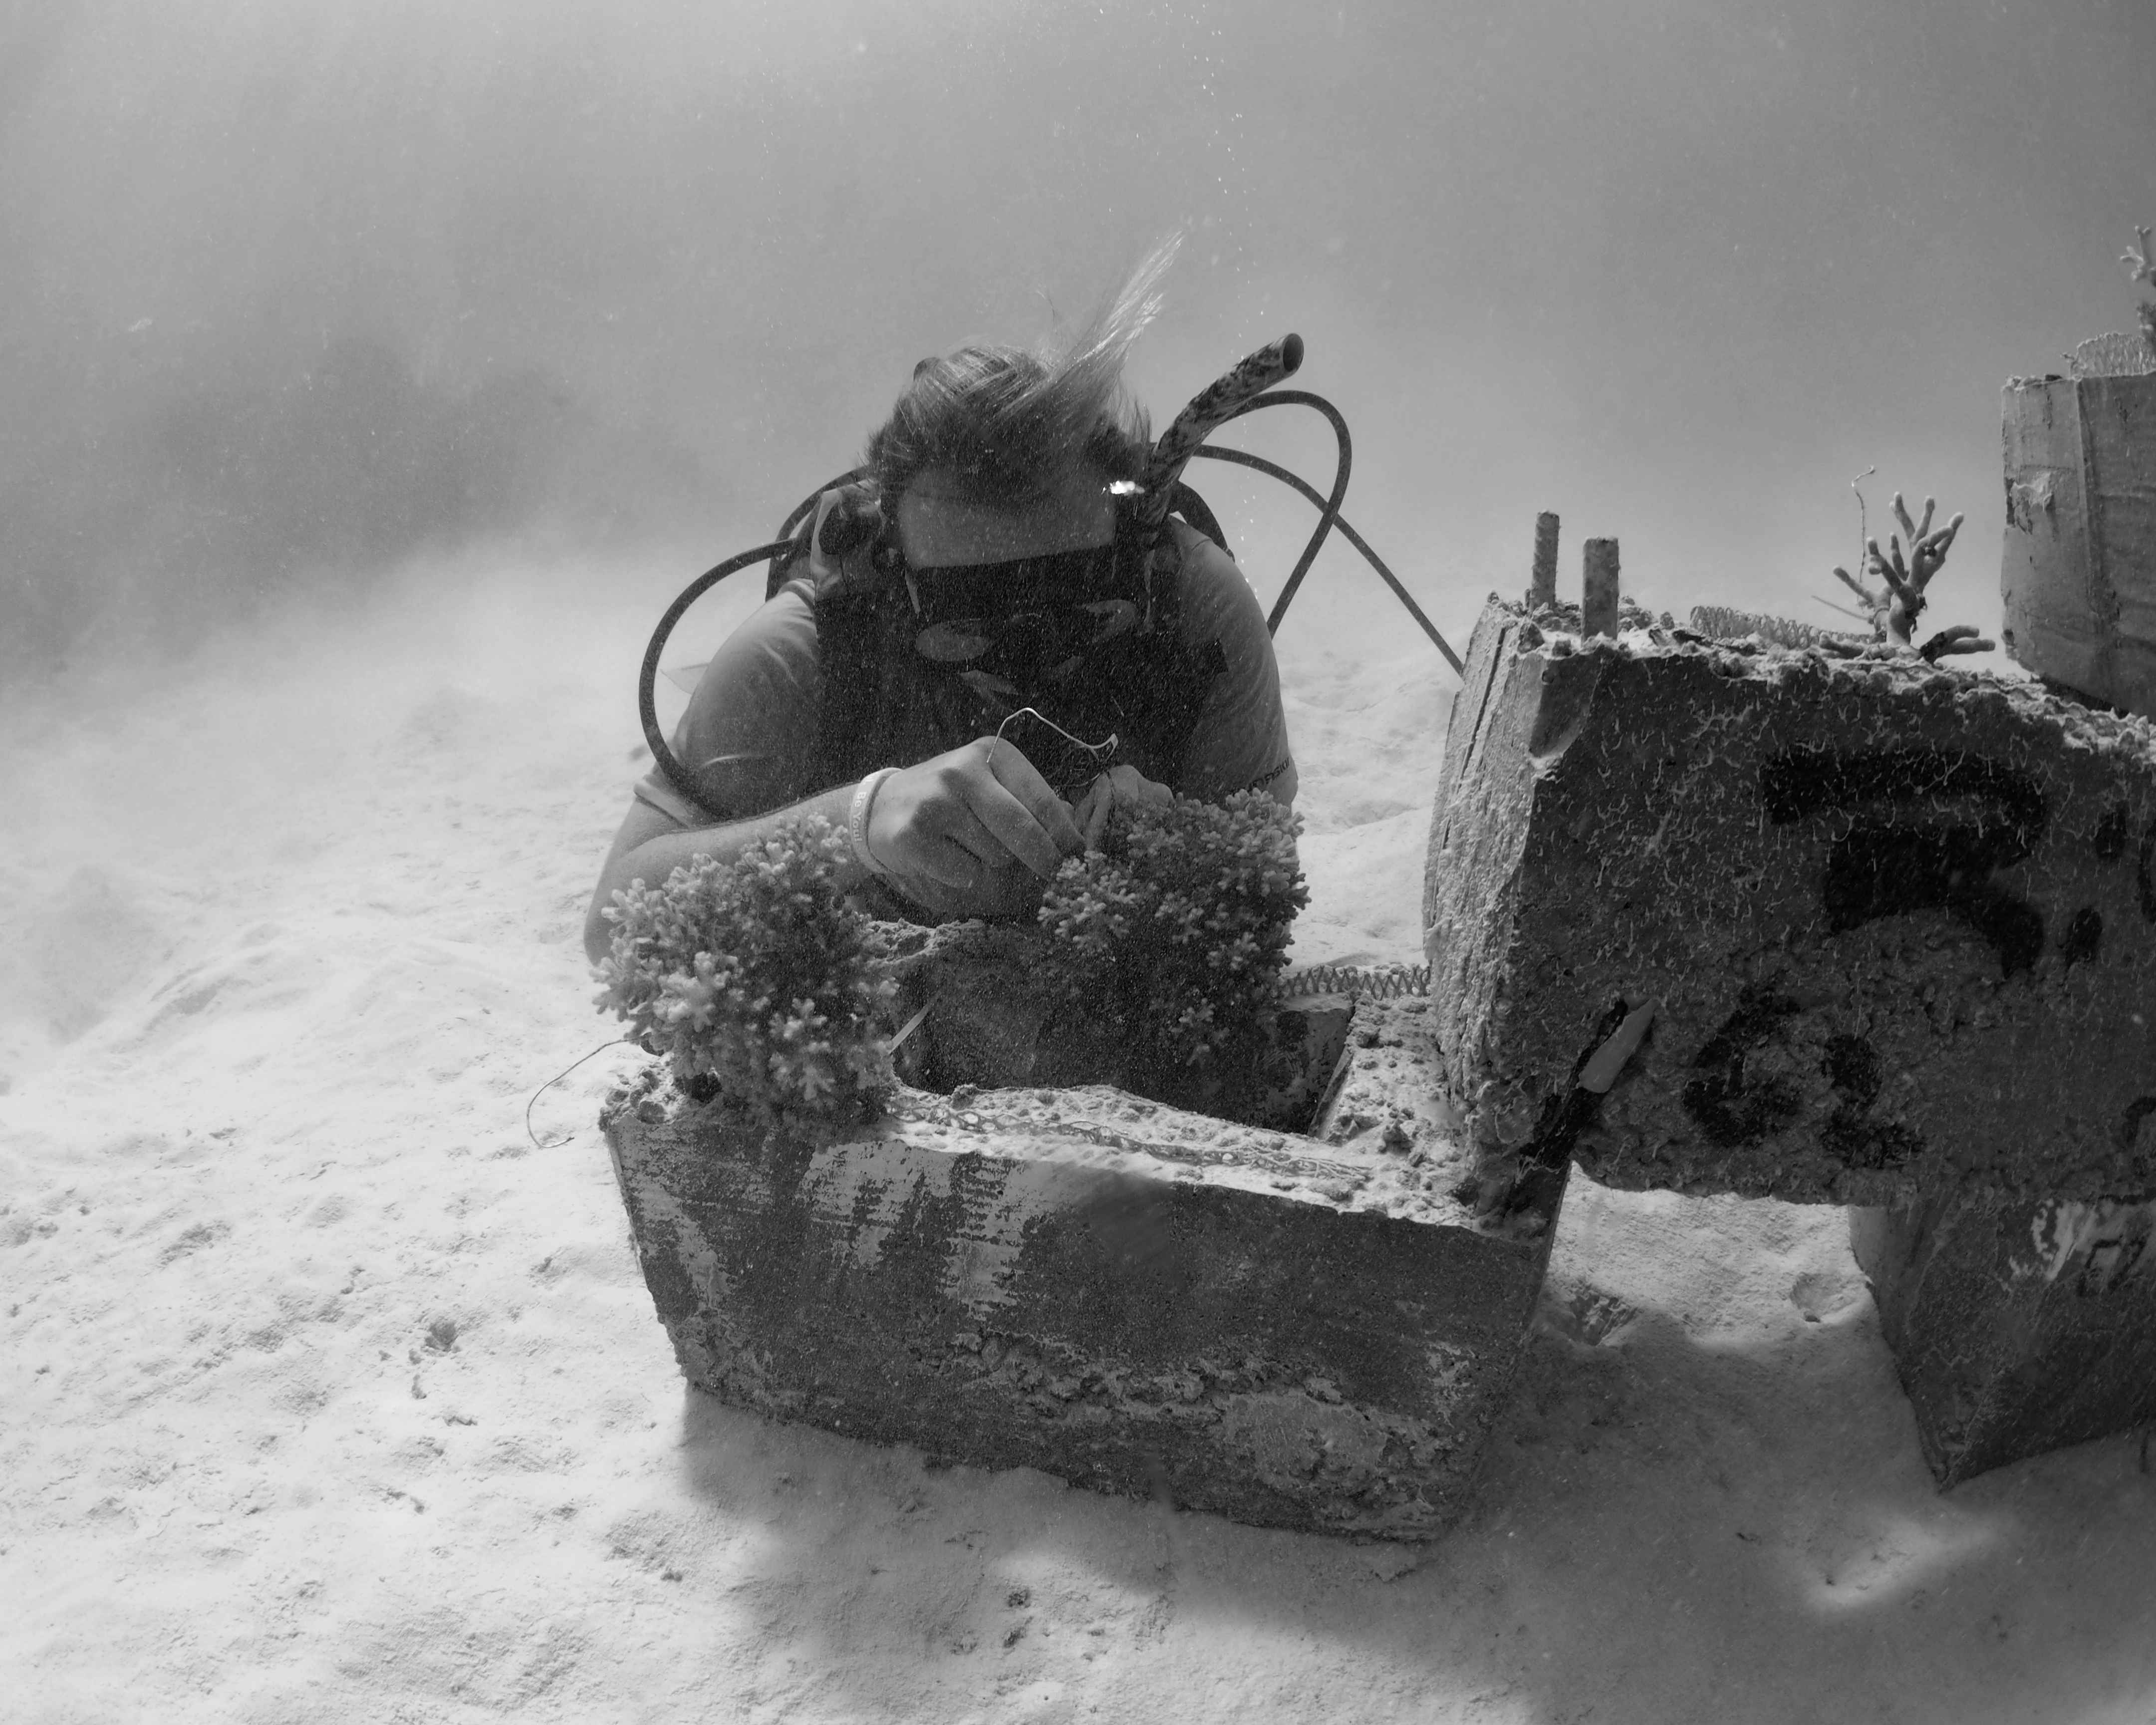 Student in scuba gear planting coral